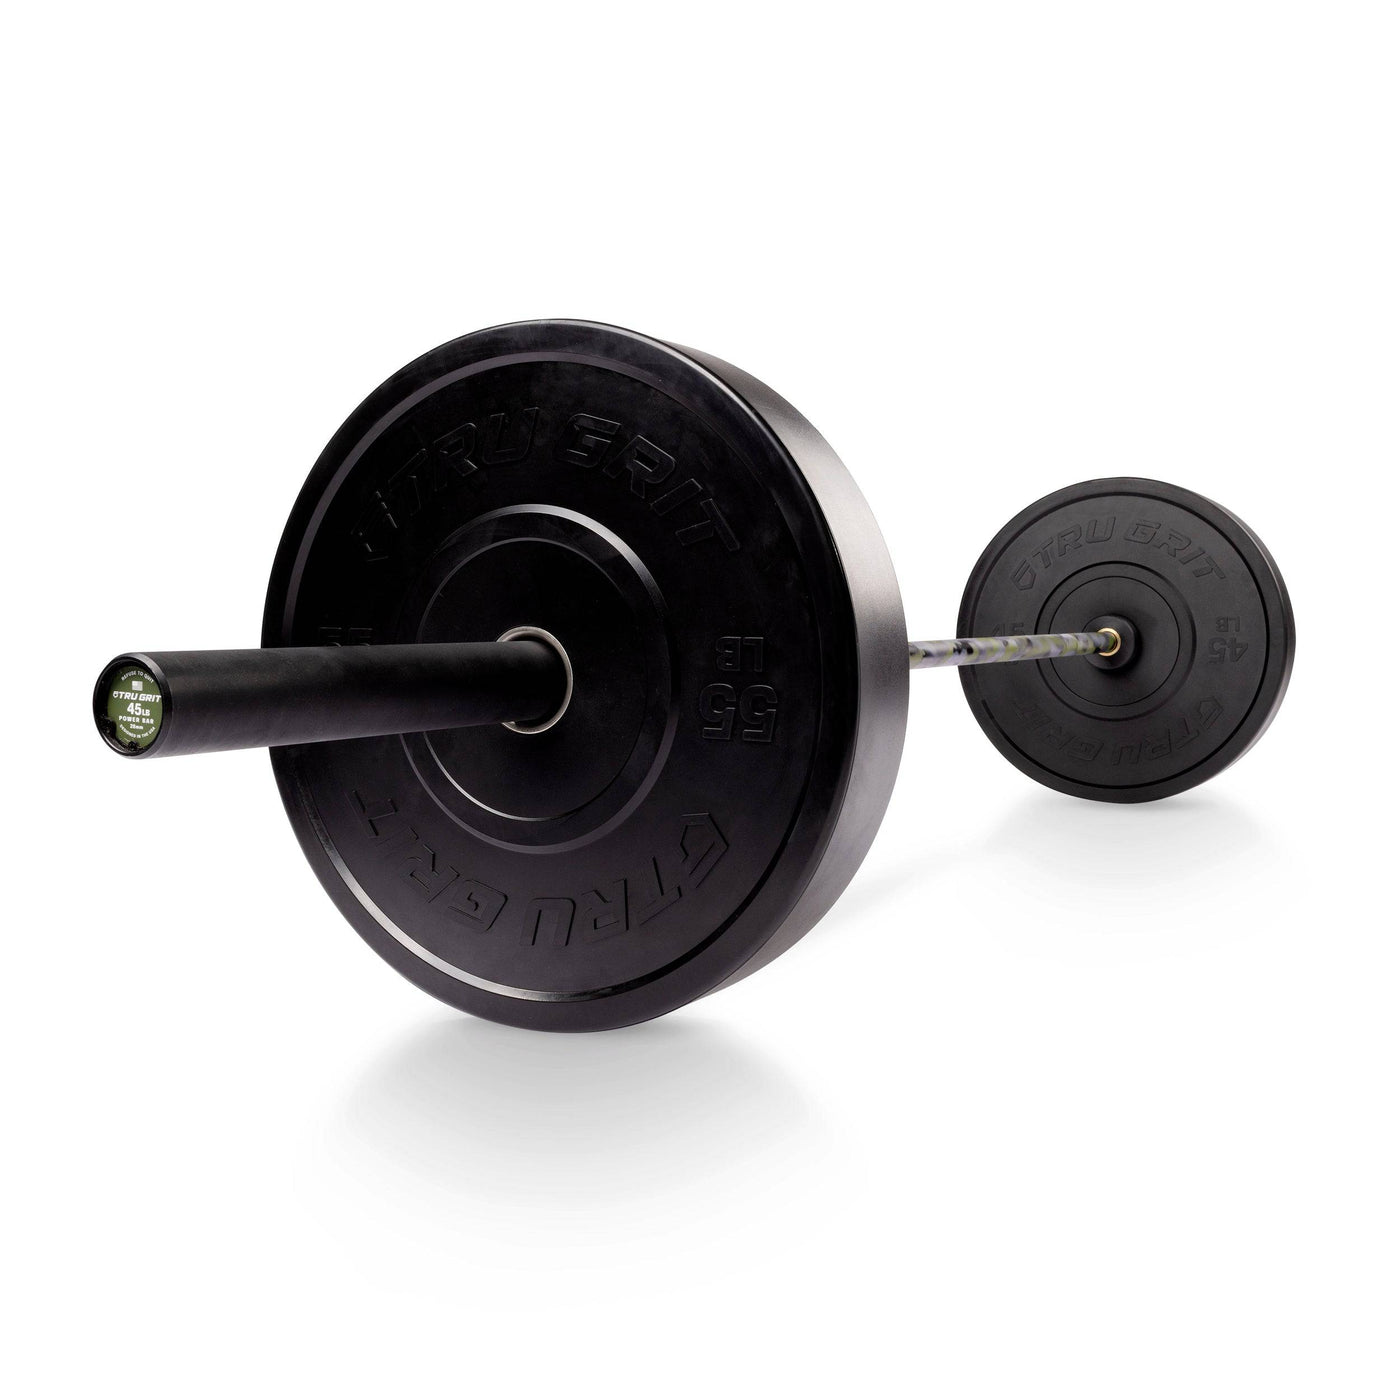 Camo Barbell Limited Edition 45LB - Tru Grit Fitness